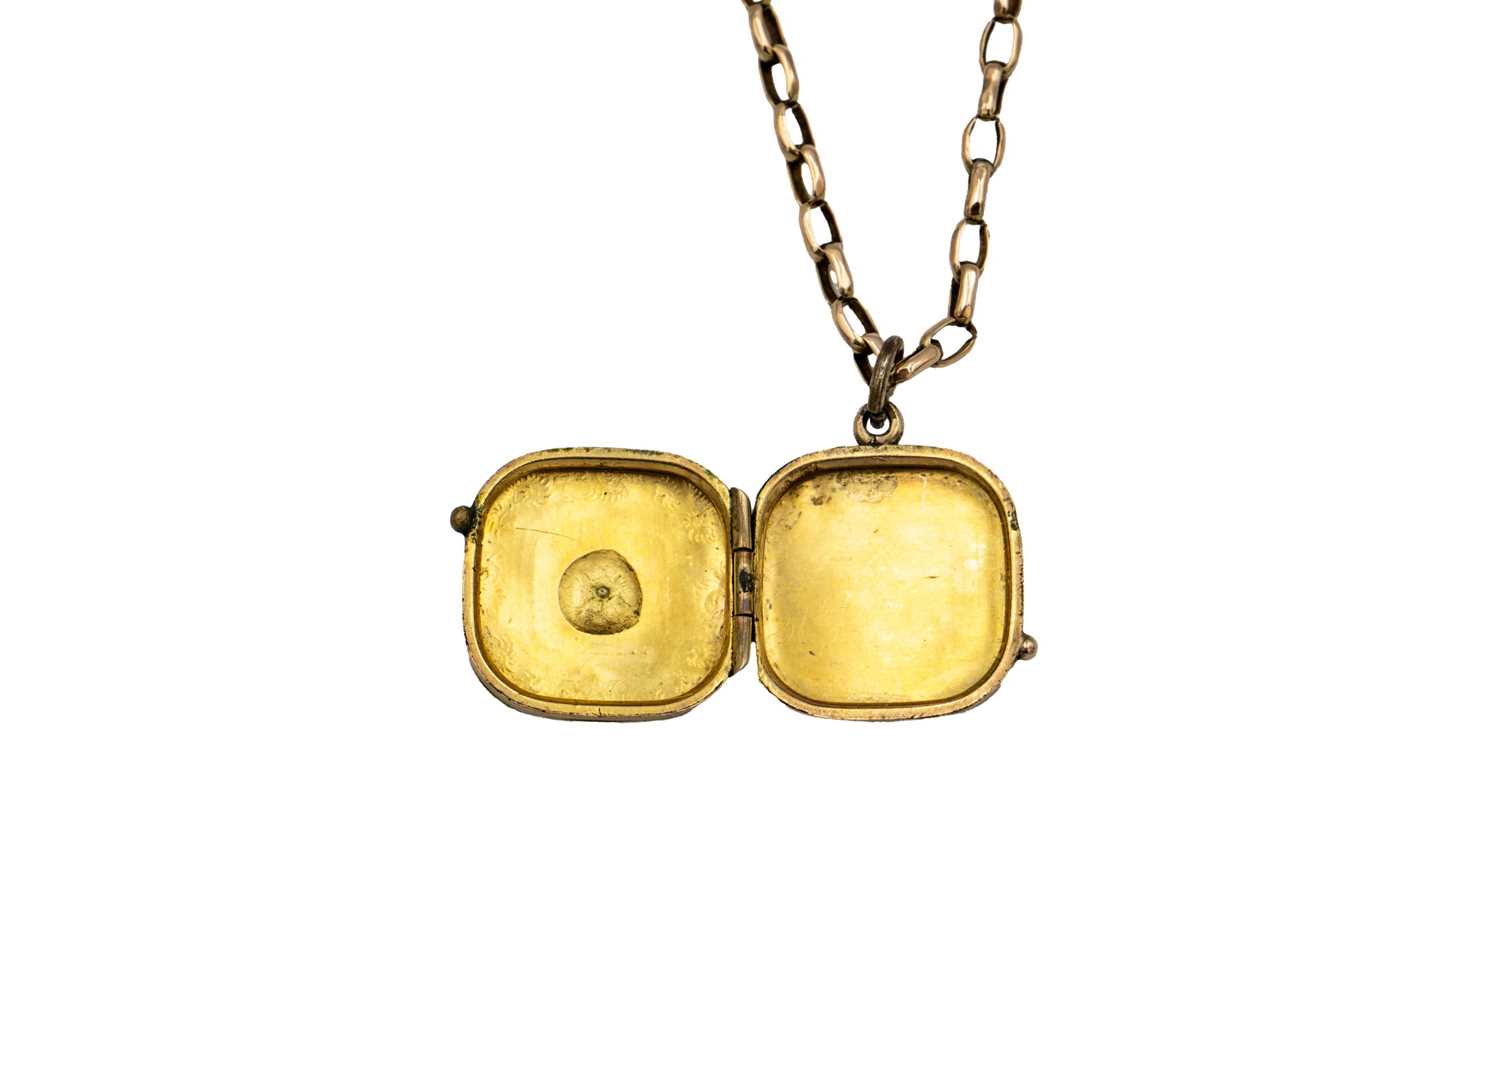 A 9ct early 20th century locket pendant on 9ct belcher link necklace. - Image 2 of 5